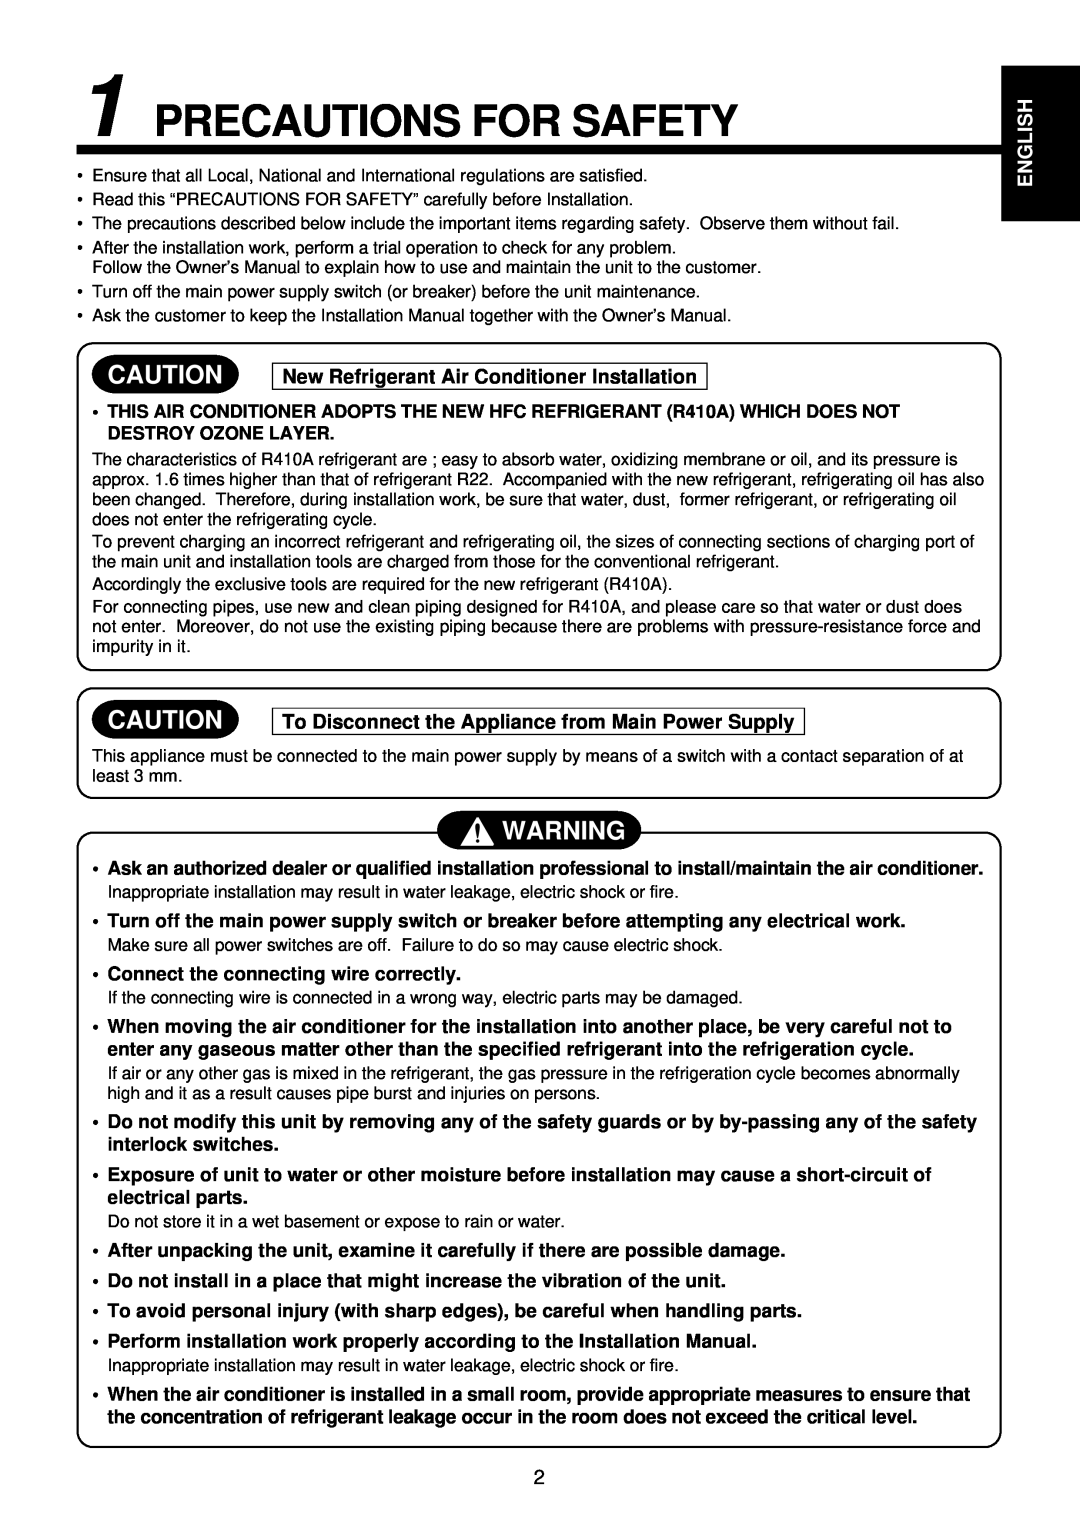 Toshiba MMK-AP0092H, MMK-AP0122H, MMK-AP0072H Precautions For Safety, New Refrigerant Air Conditioner Installation, English 